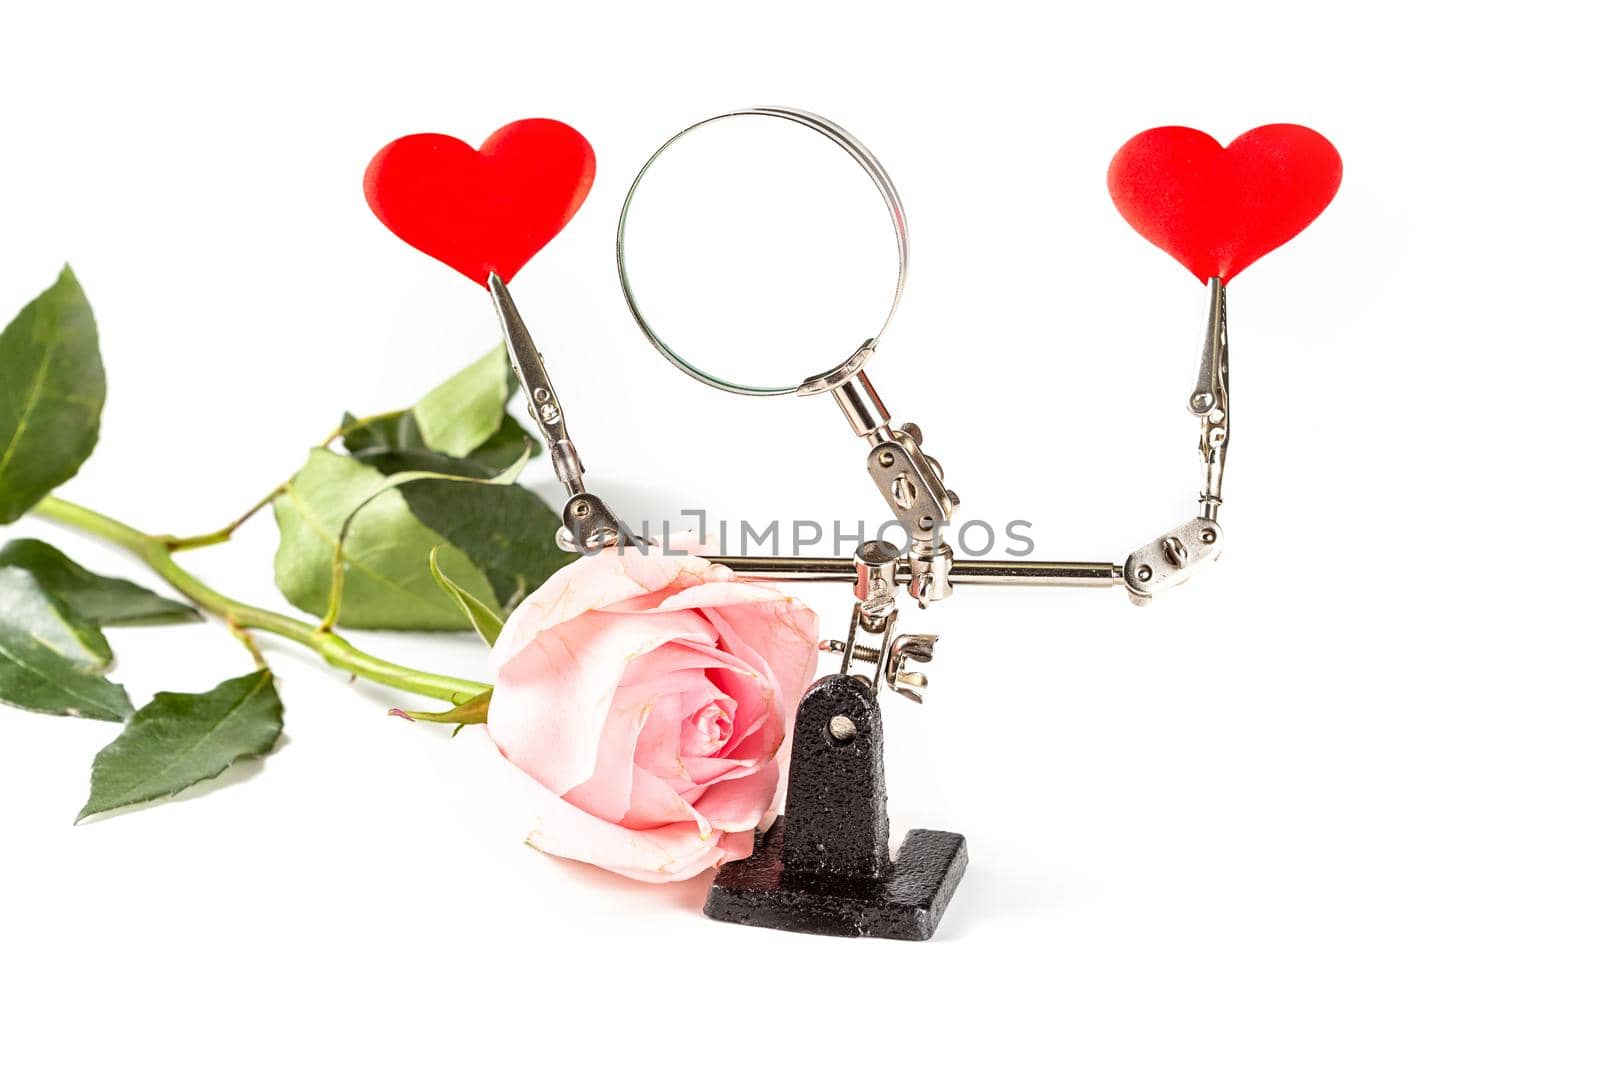 .Valentines Day background with tool third hand holding hearts and rose on white by galinasharapova